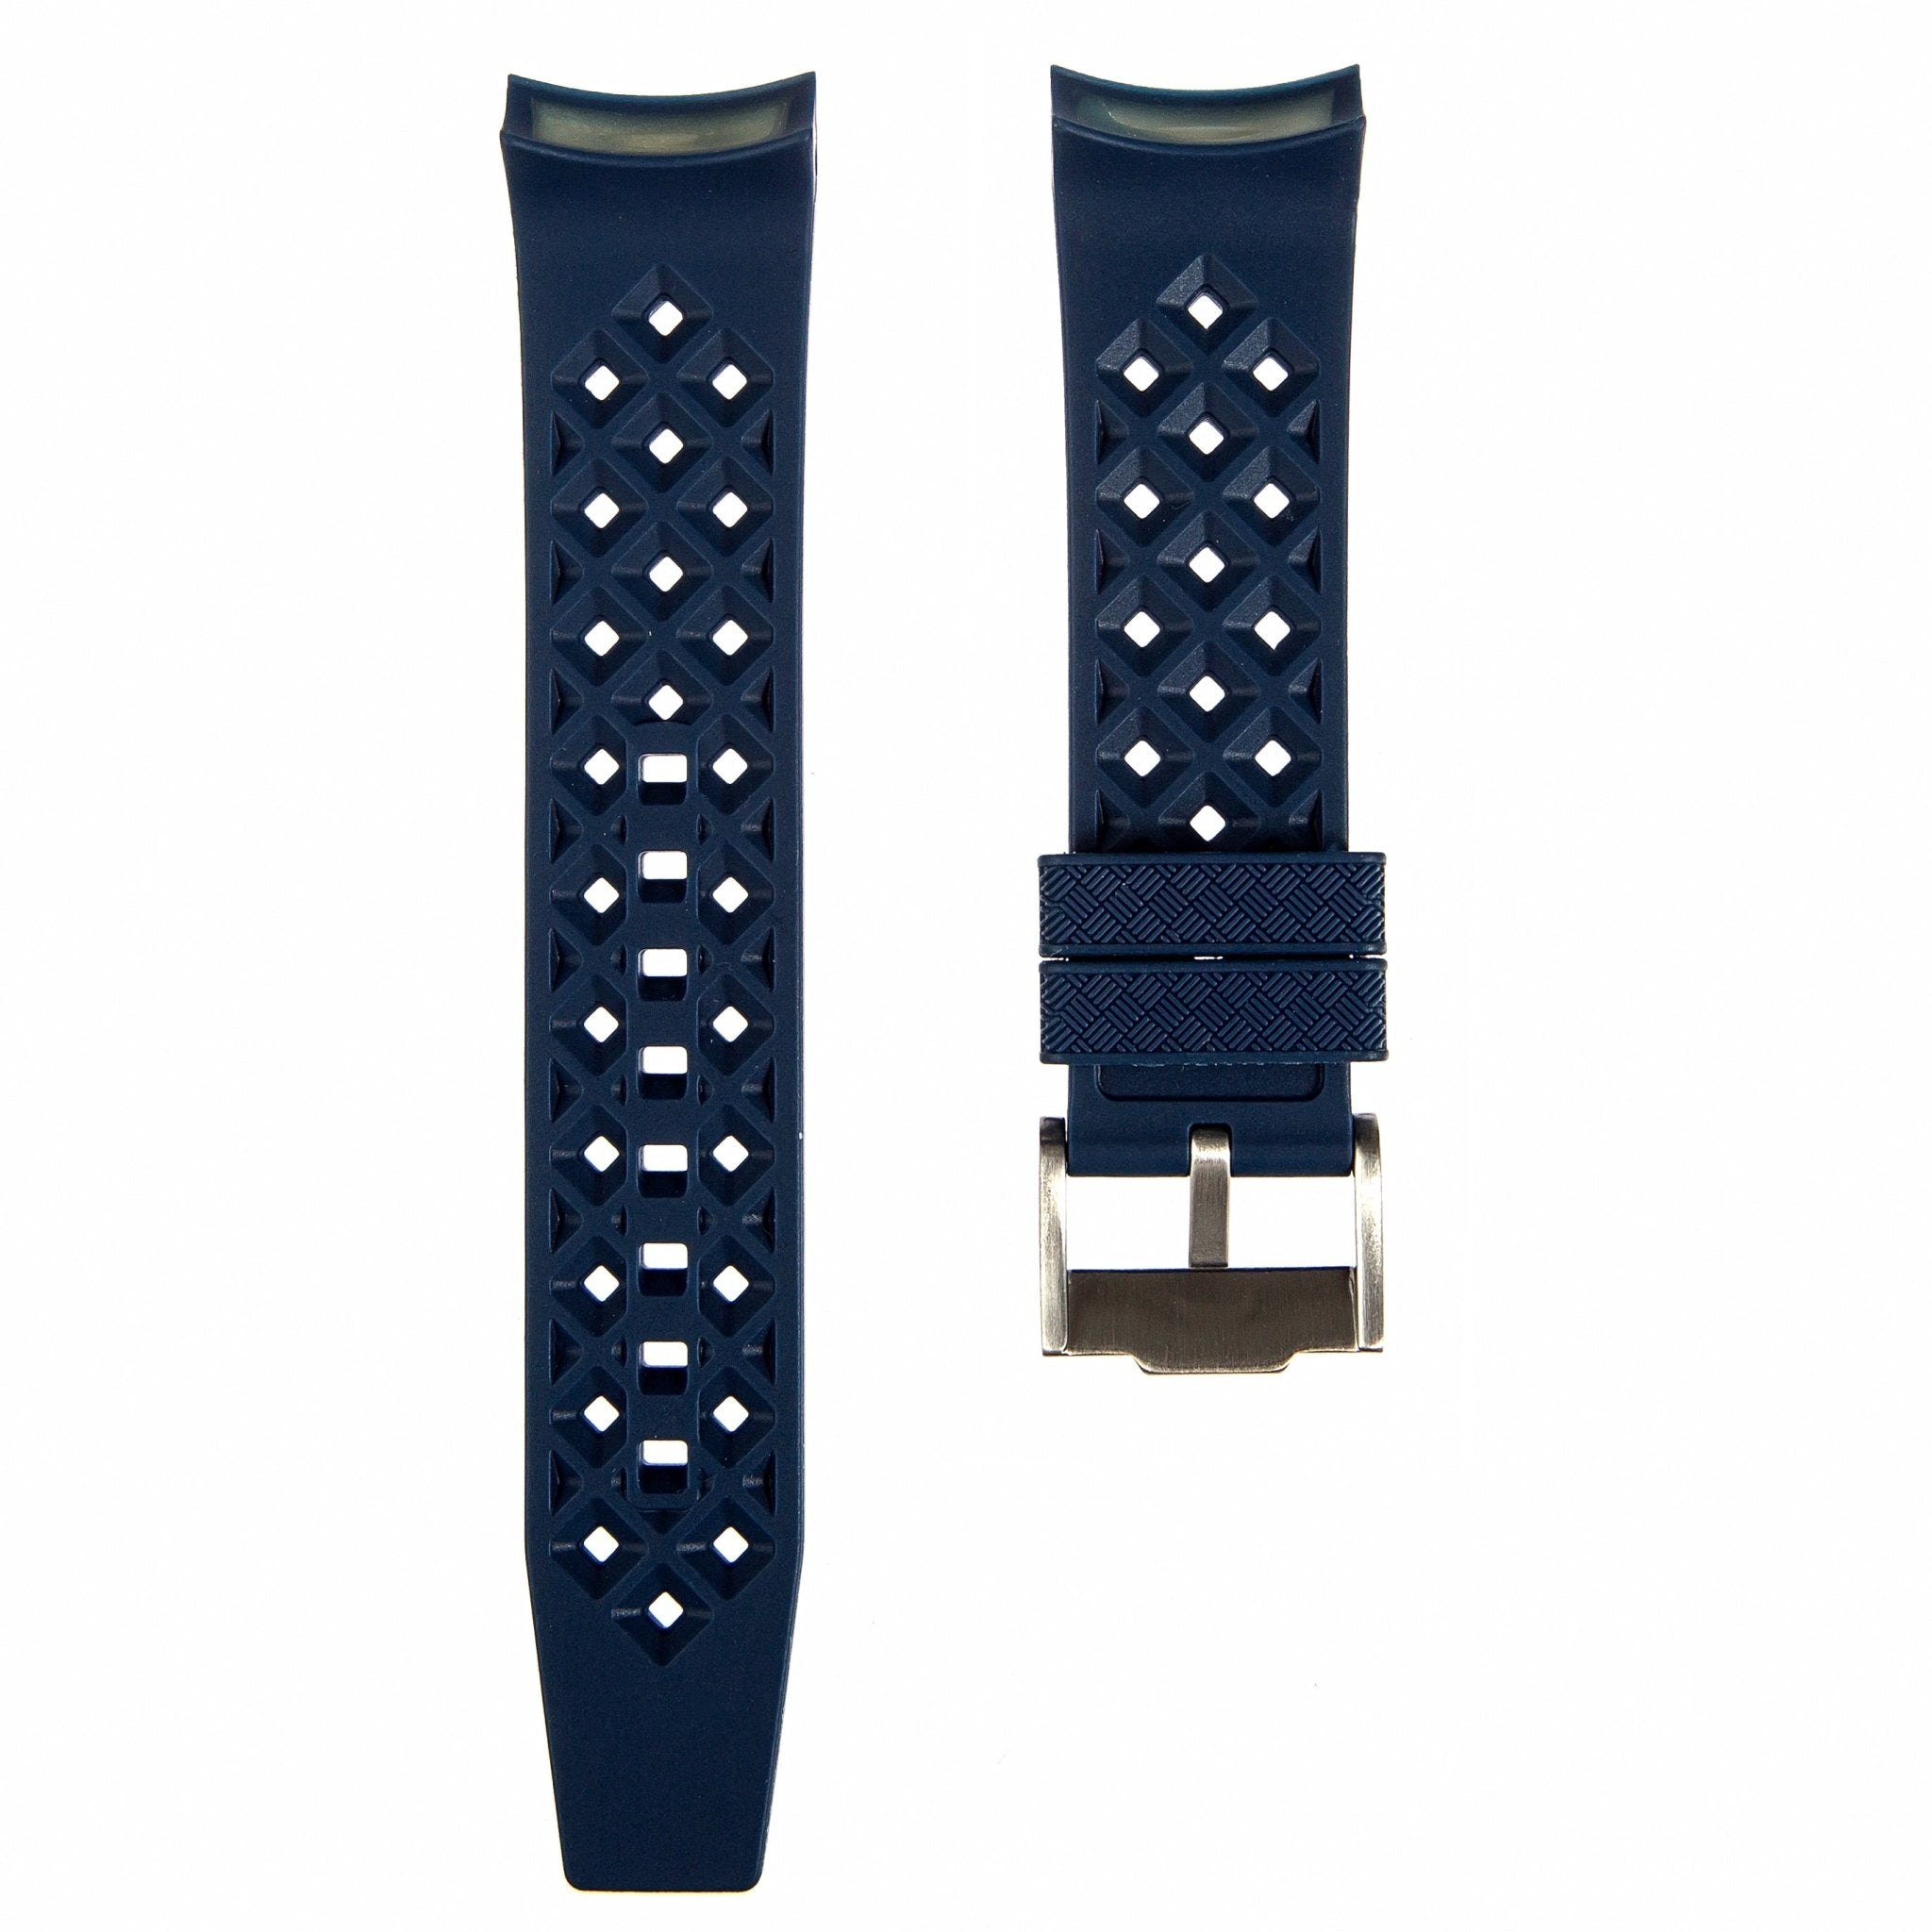 Vintage Tropical Curved End Premium Silicone Strap - Compatible with Blancpain x Swatch - Navy (2415) -StrapSeeker